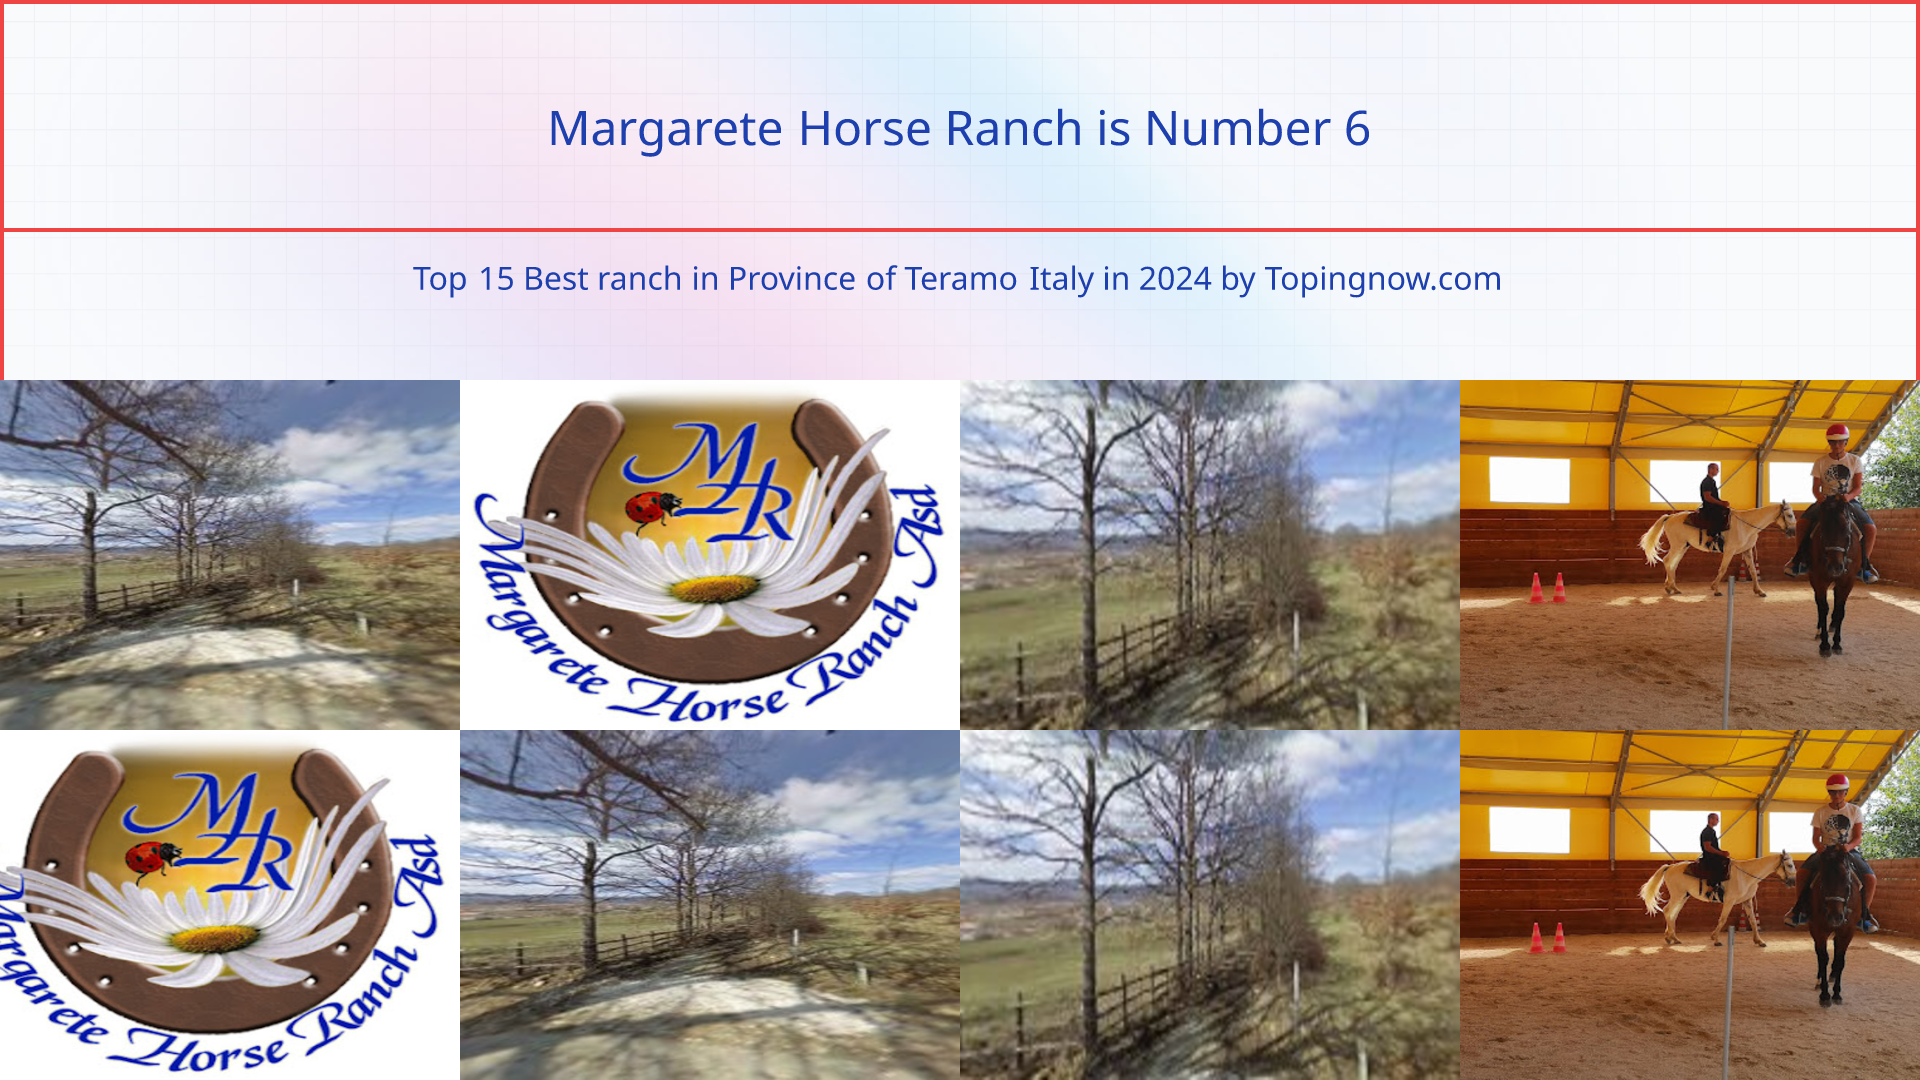 Margarete Horse Ranch: Top 15 Best ranch in Province of Teramo Italy in 2024